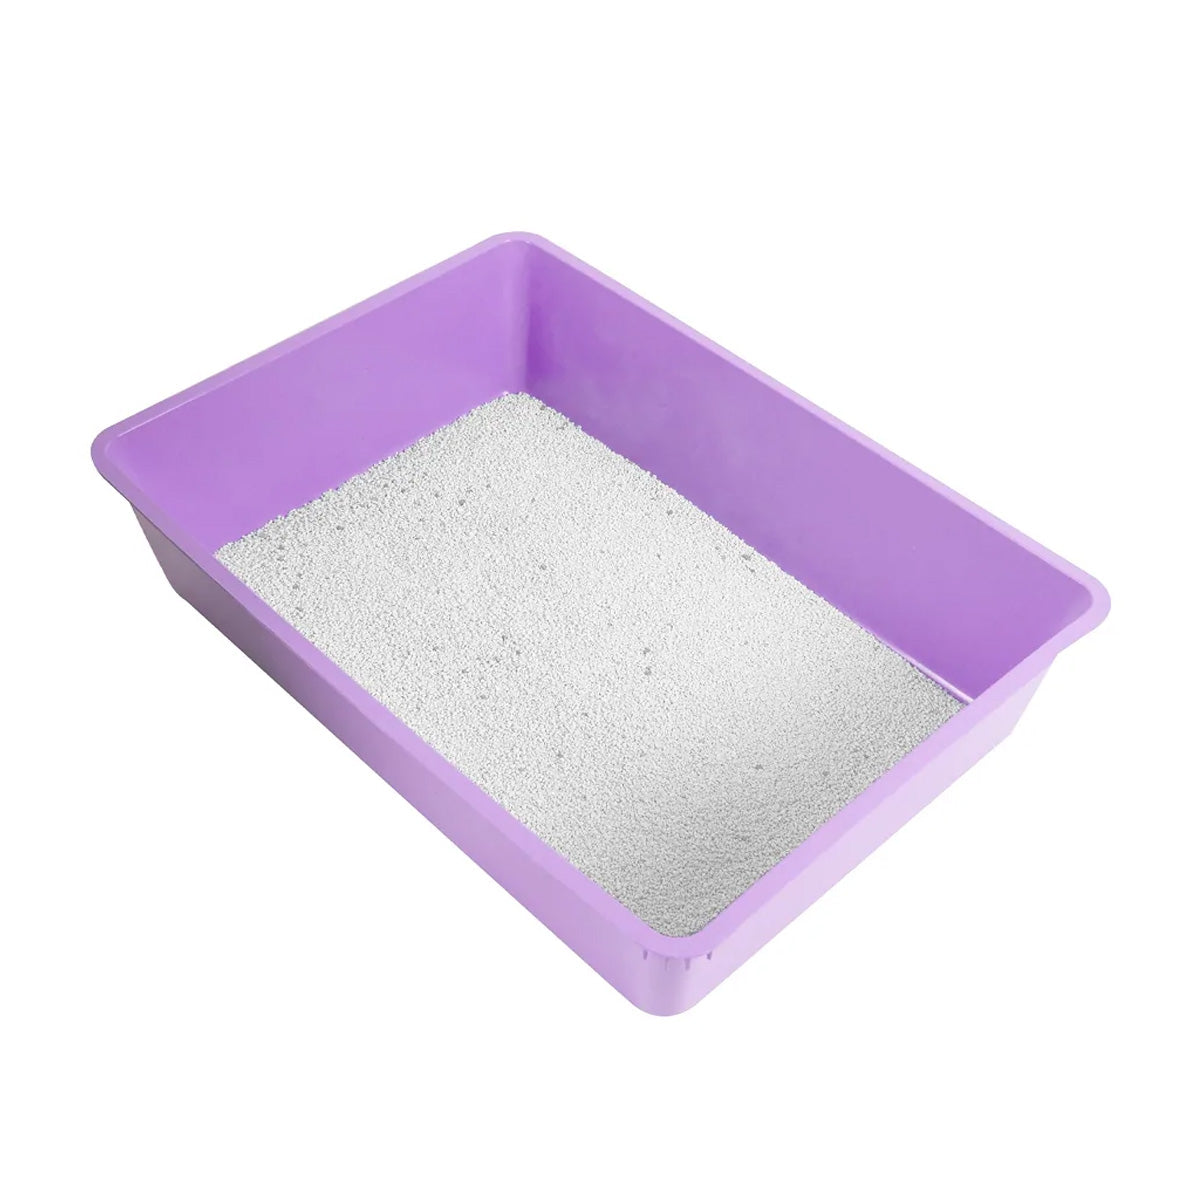 Jake's Farm Yard Clumping Cat Litter with Lavender Scent